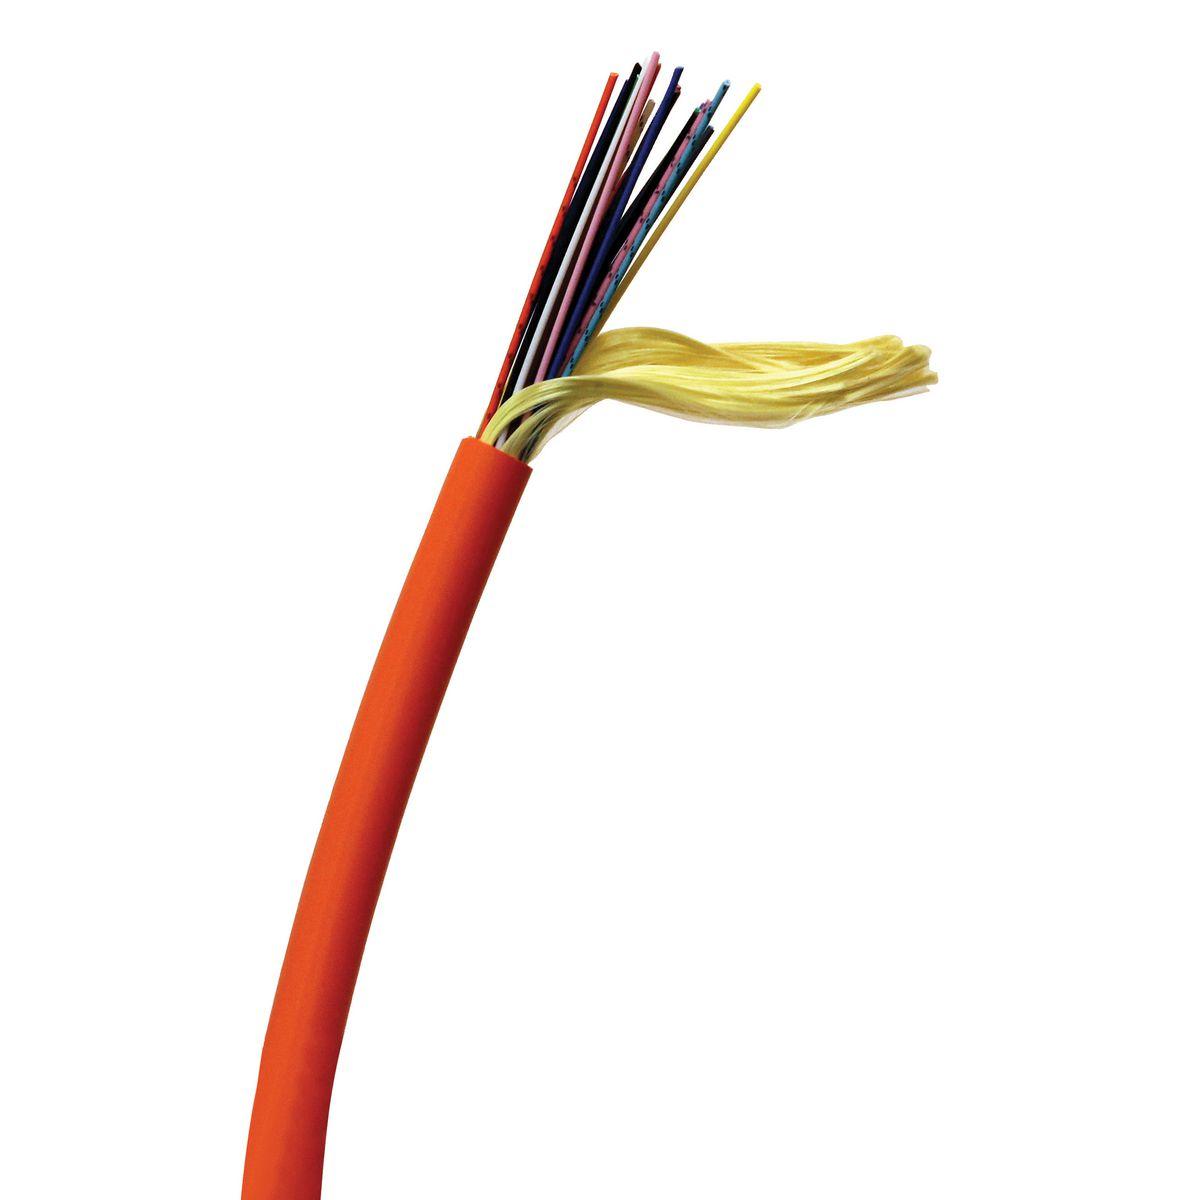 Hubbell HFCD1006R6 HFCD1 Series Indoor Tight Buffer Distribution, 6 strand, Riser, OM1, MM , Orange Jacket  ; Corning ClearCurve� Multimode Bend-Insensitive Optical Fiber ; E-Z Strip Buffer For Contractor-Friendly Termination ; Compact Cable Diameter Reduces Pathway Congest